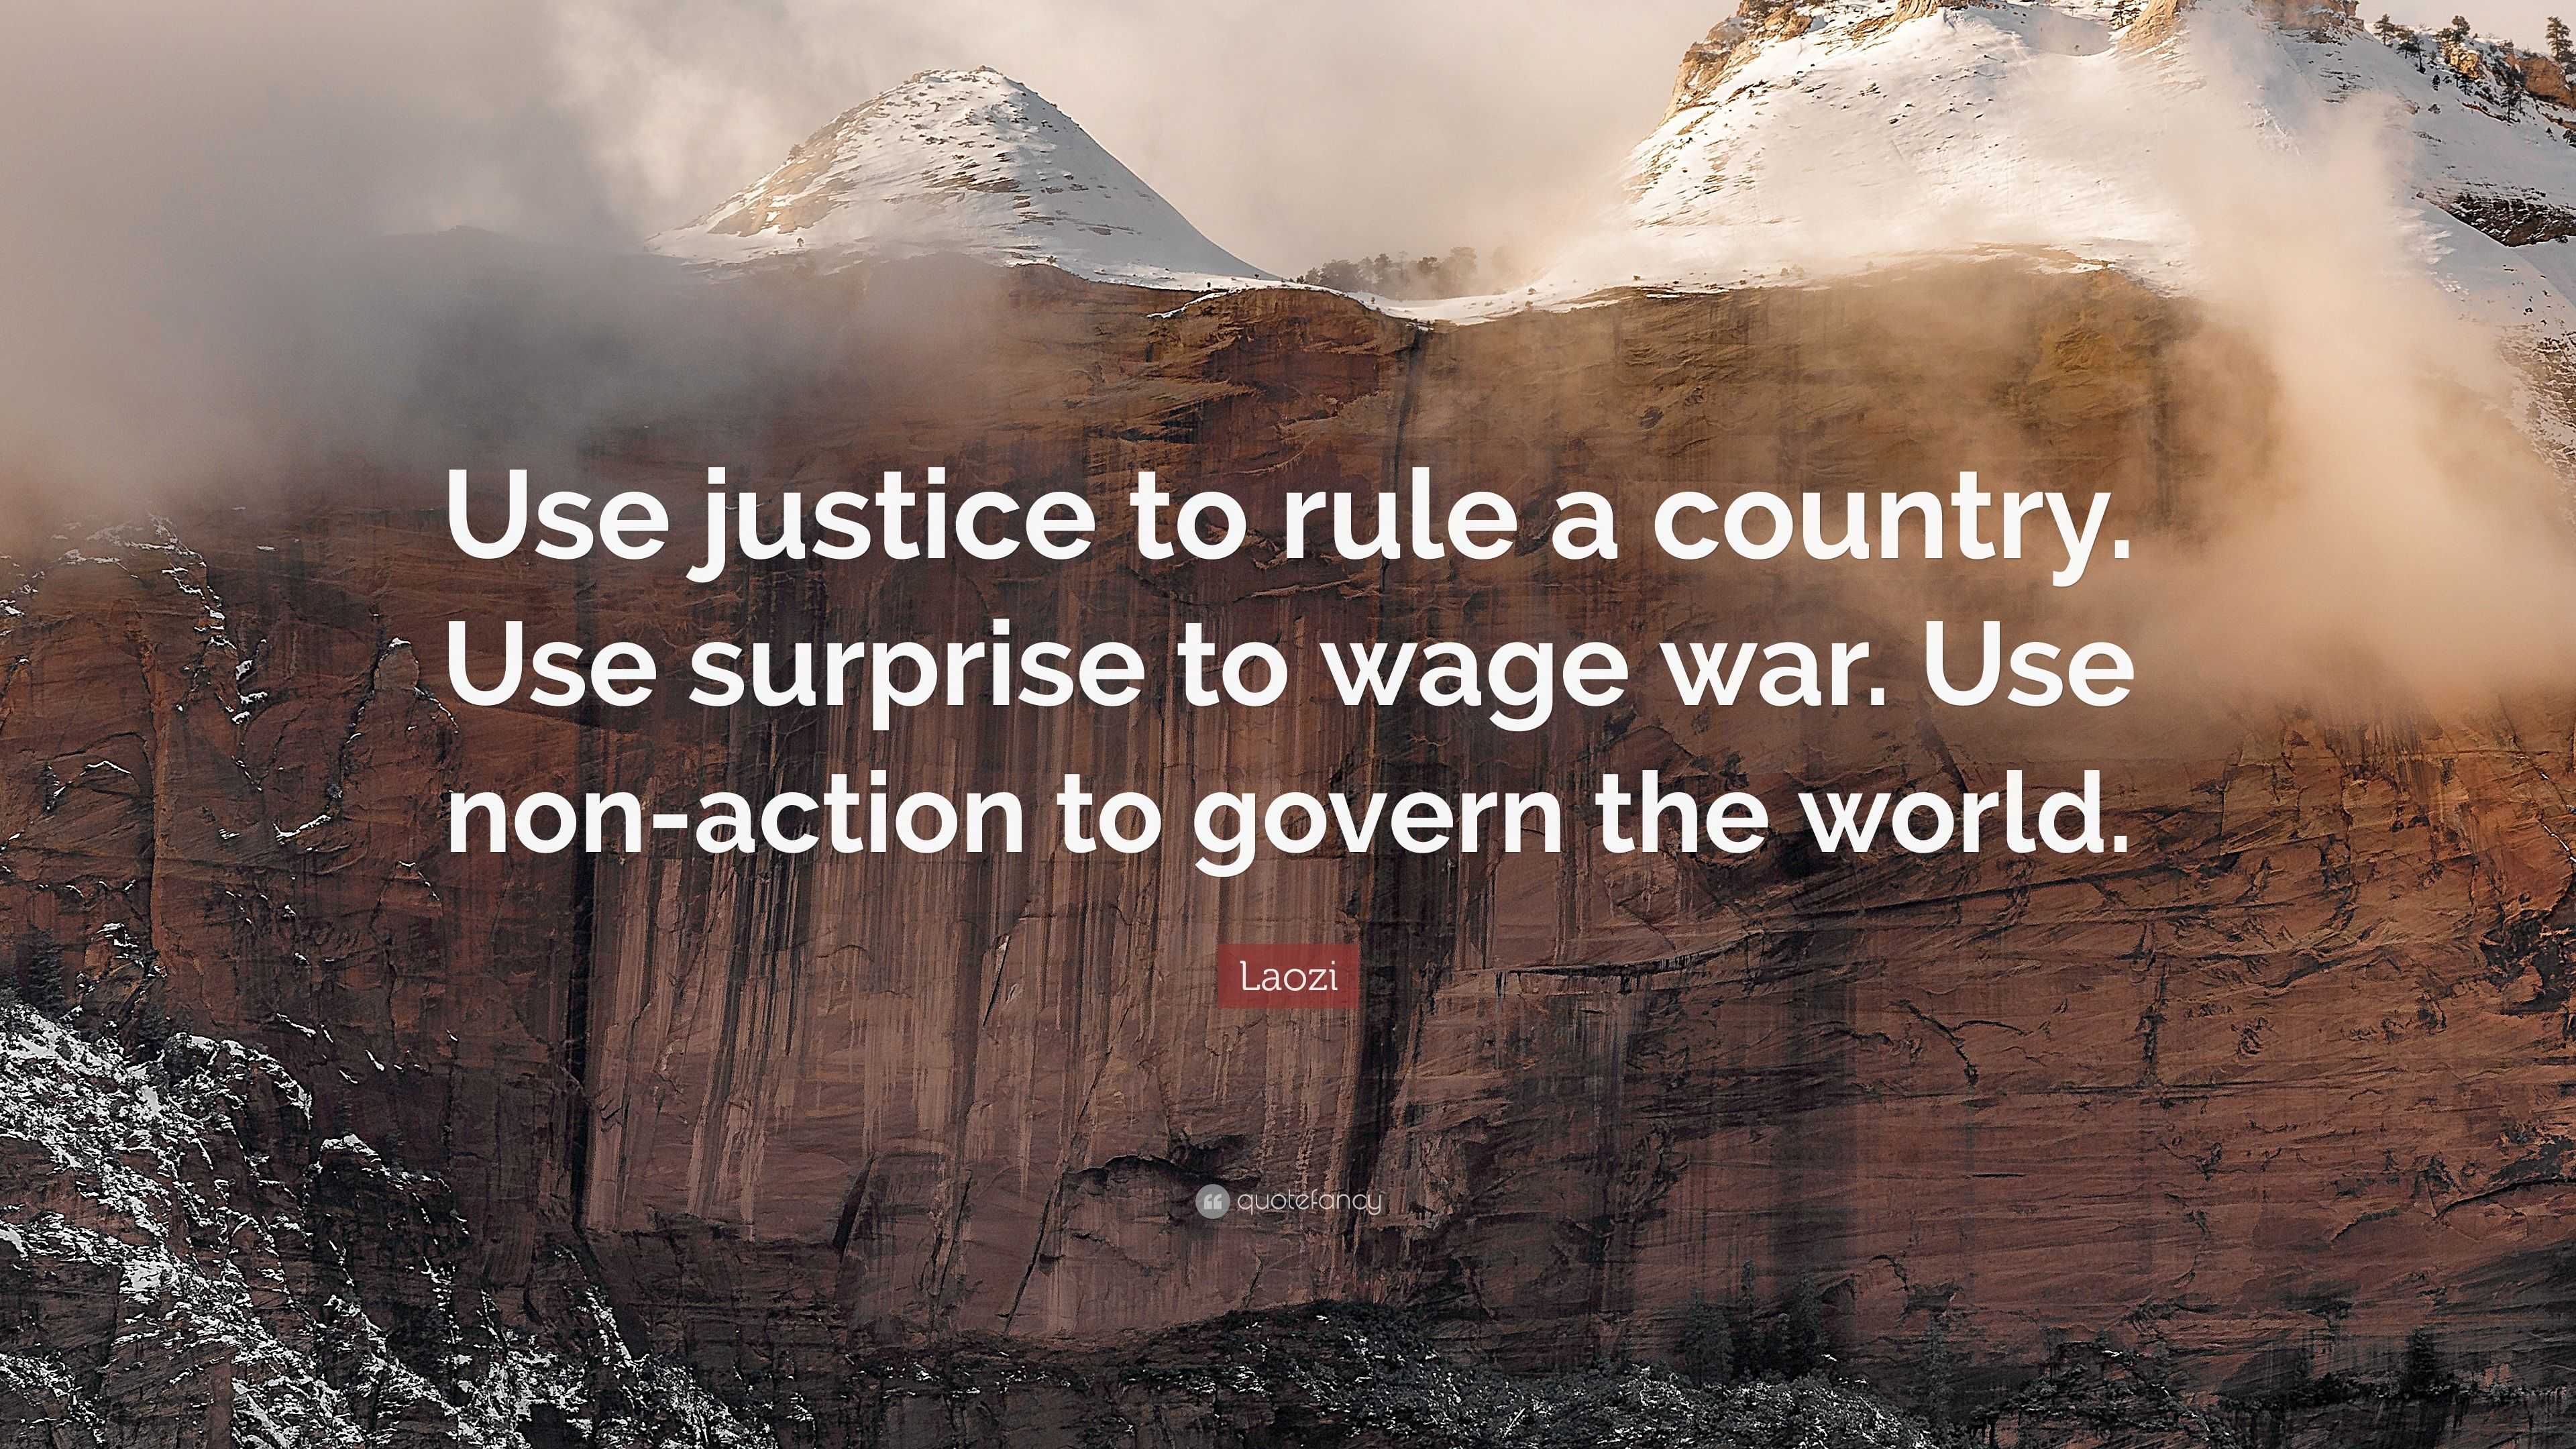 Laozi Quote: “Use justice to rule a country. Use surprise to wage war ...